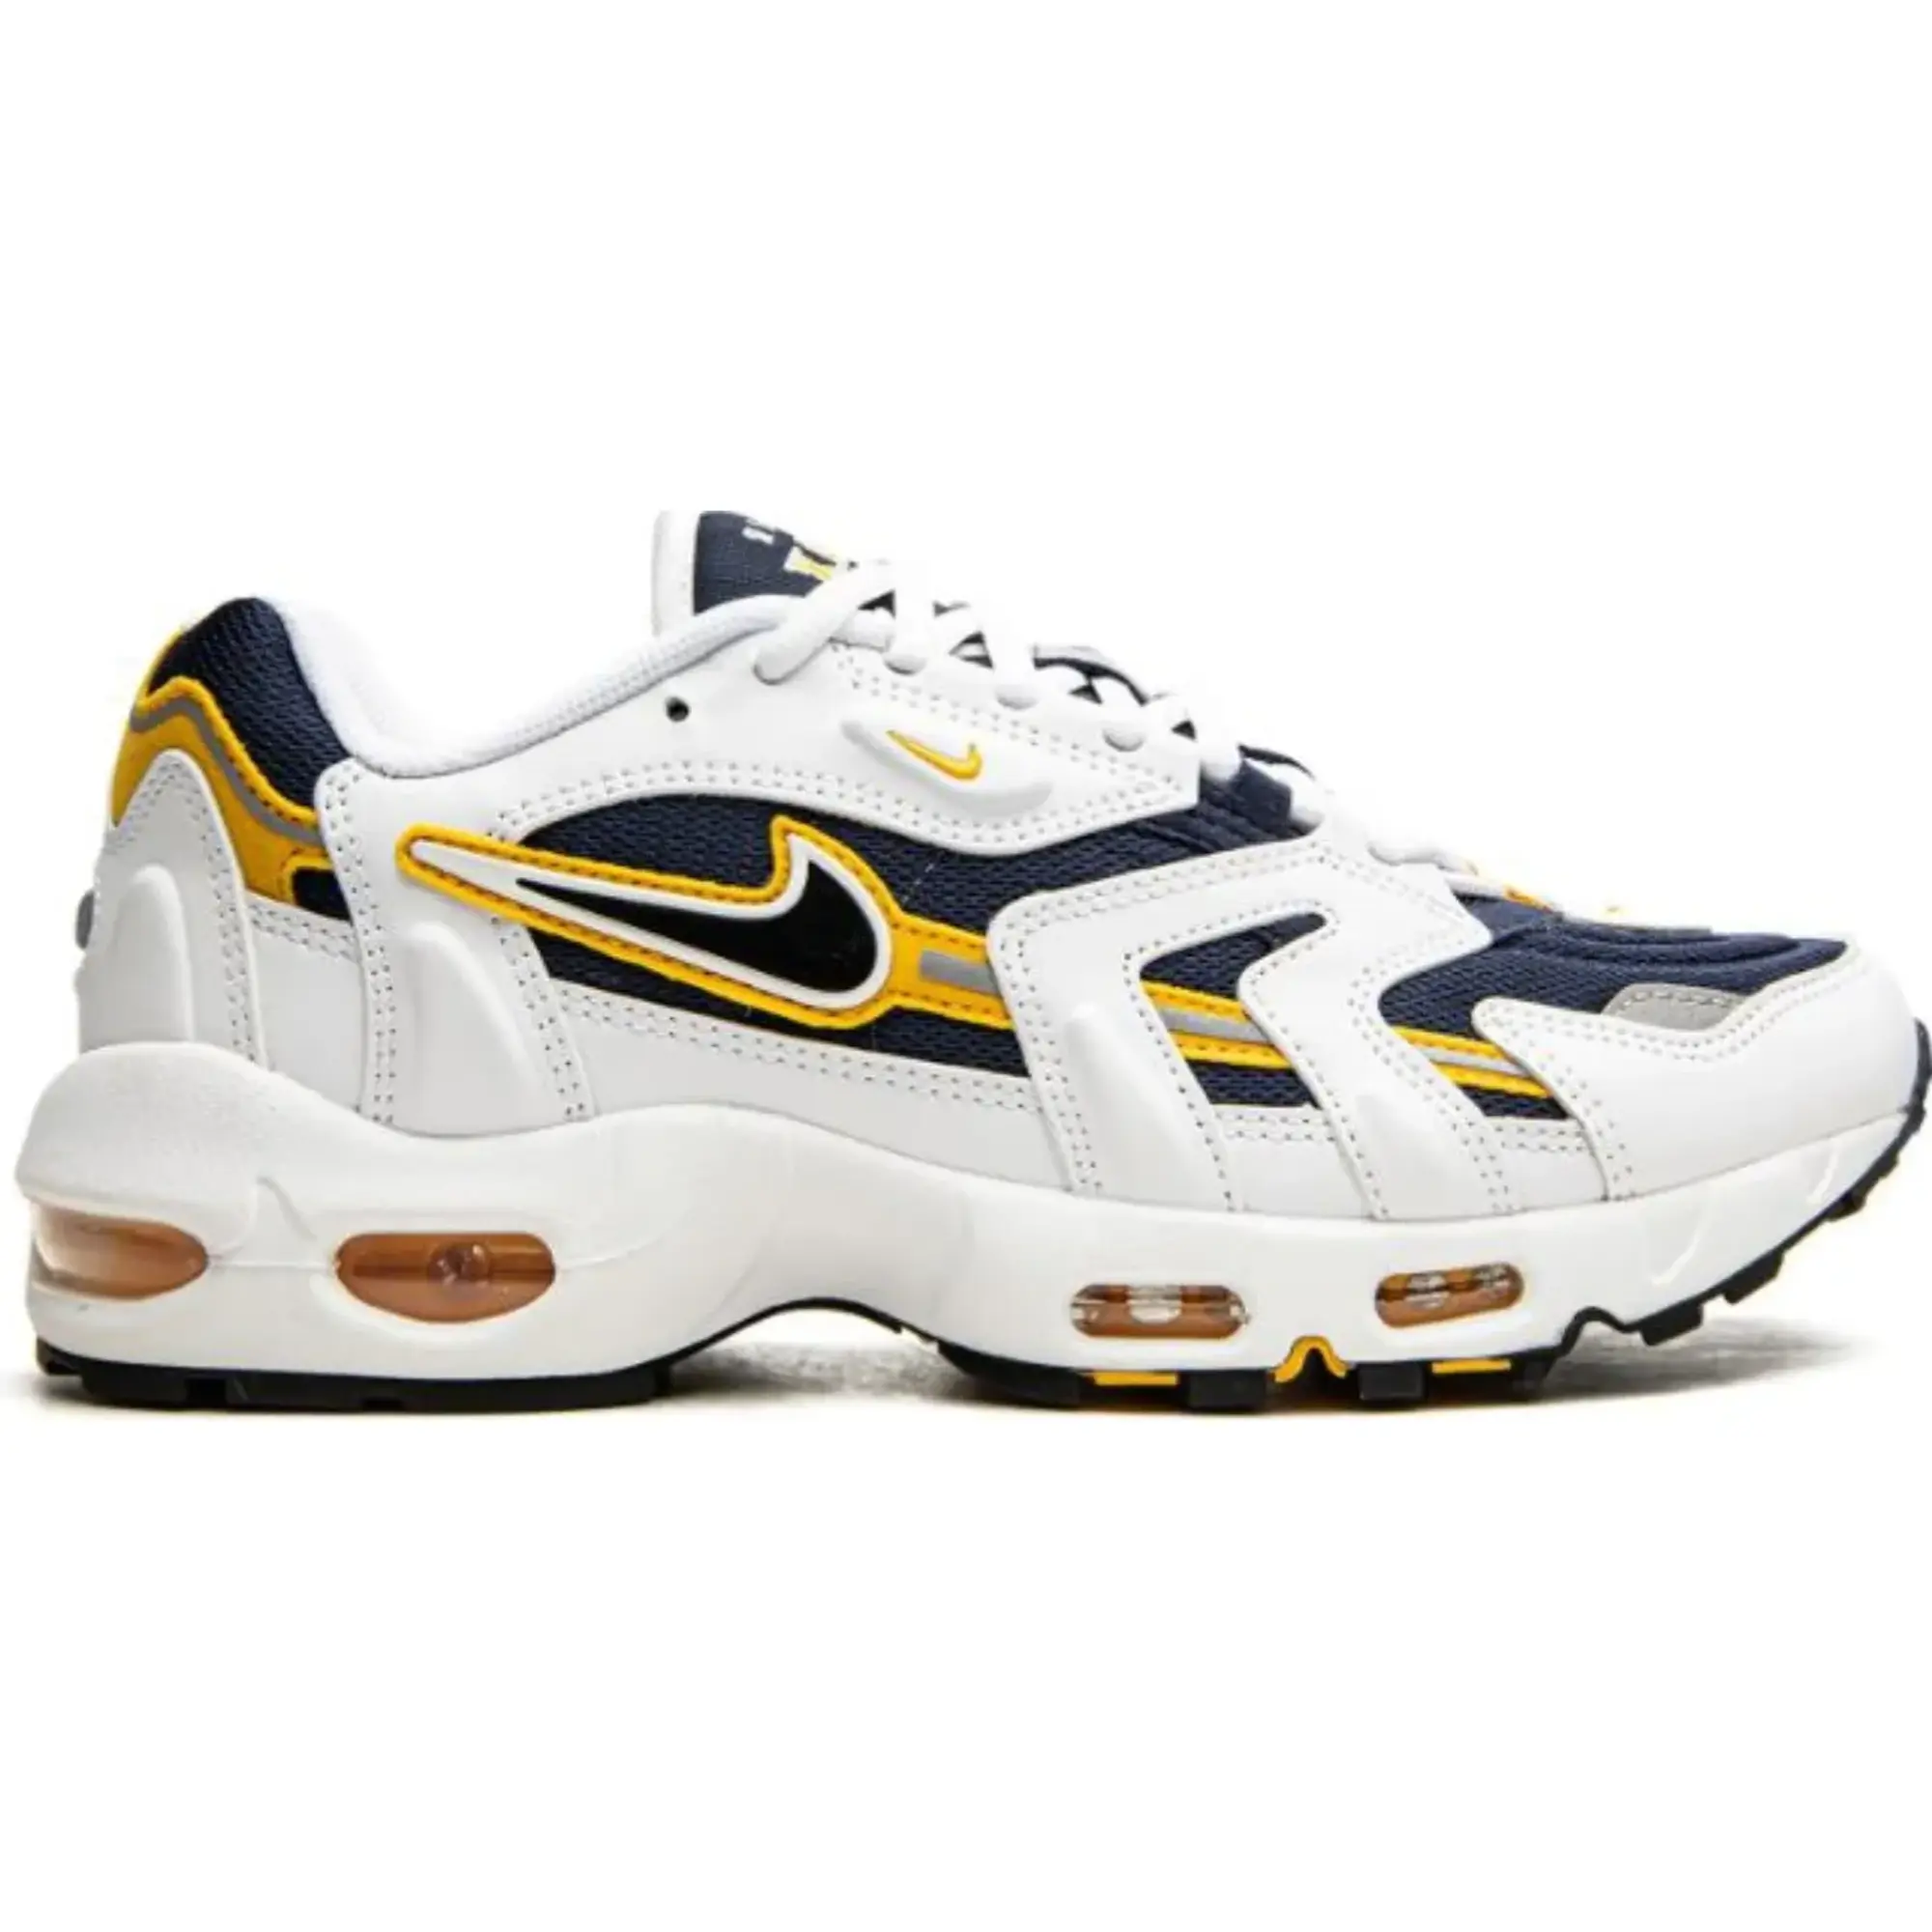 Nike Air Max 96 2 Goldenrod Shoes